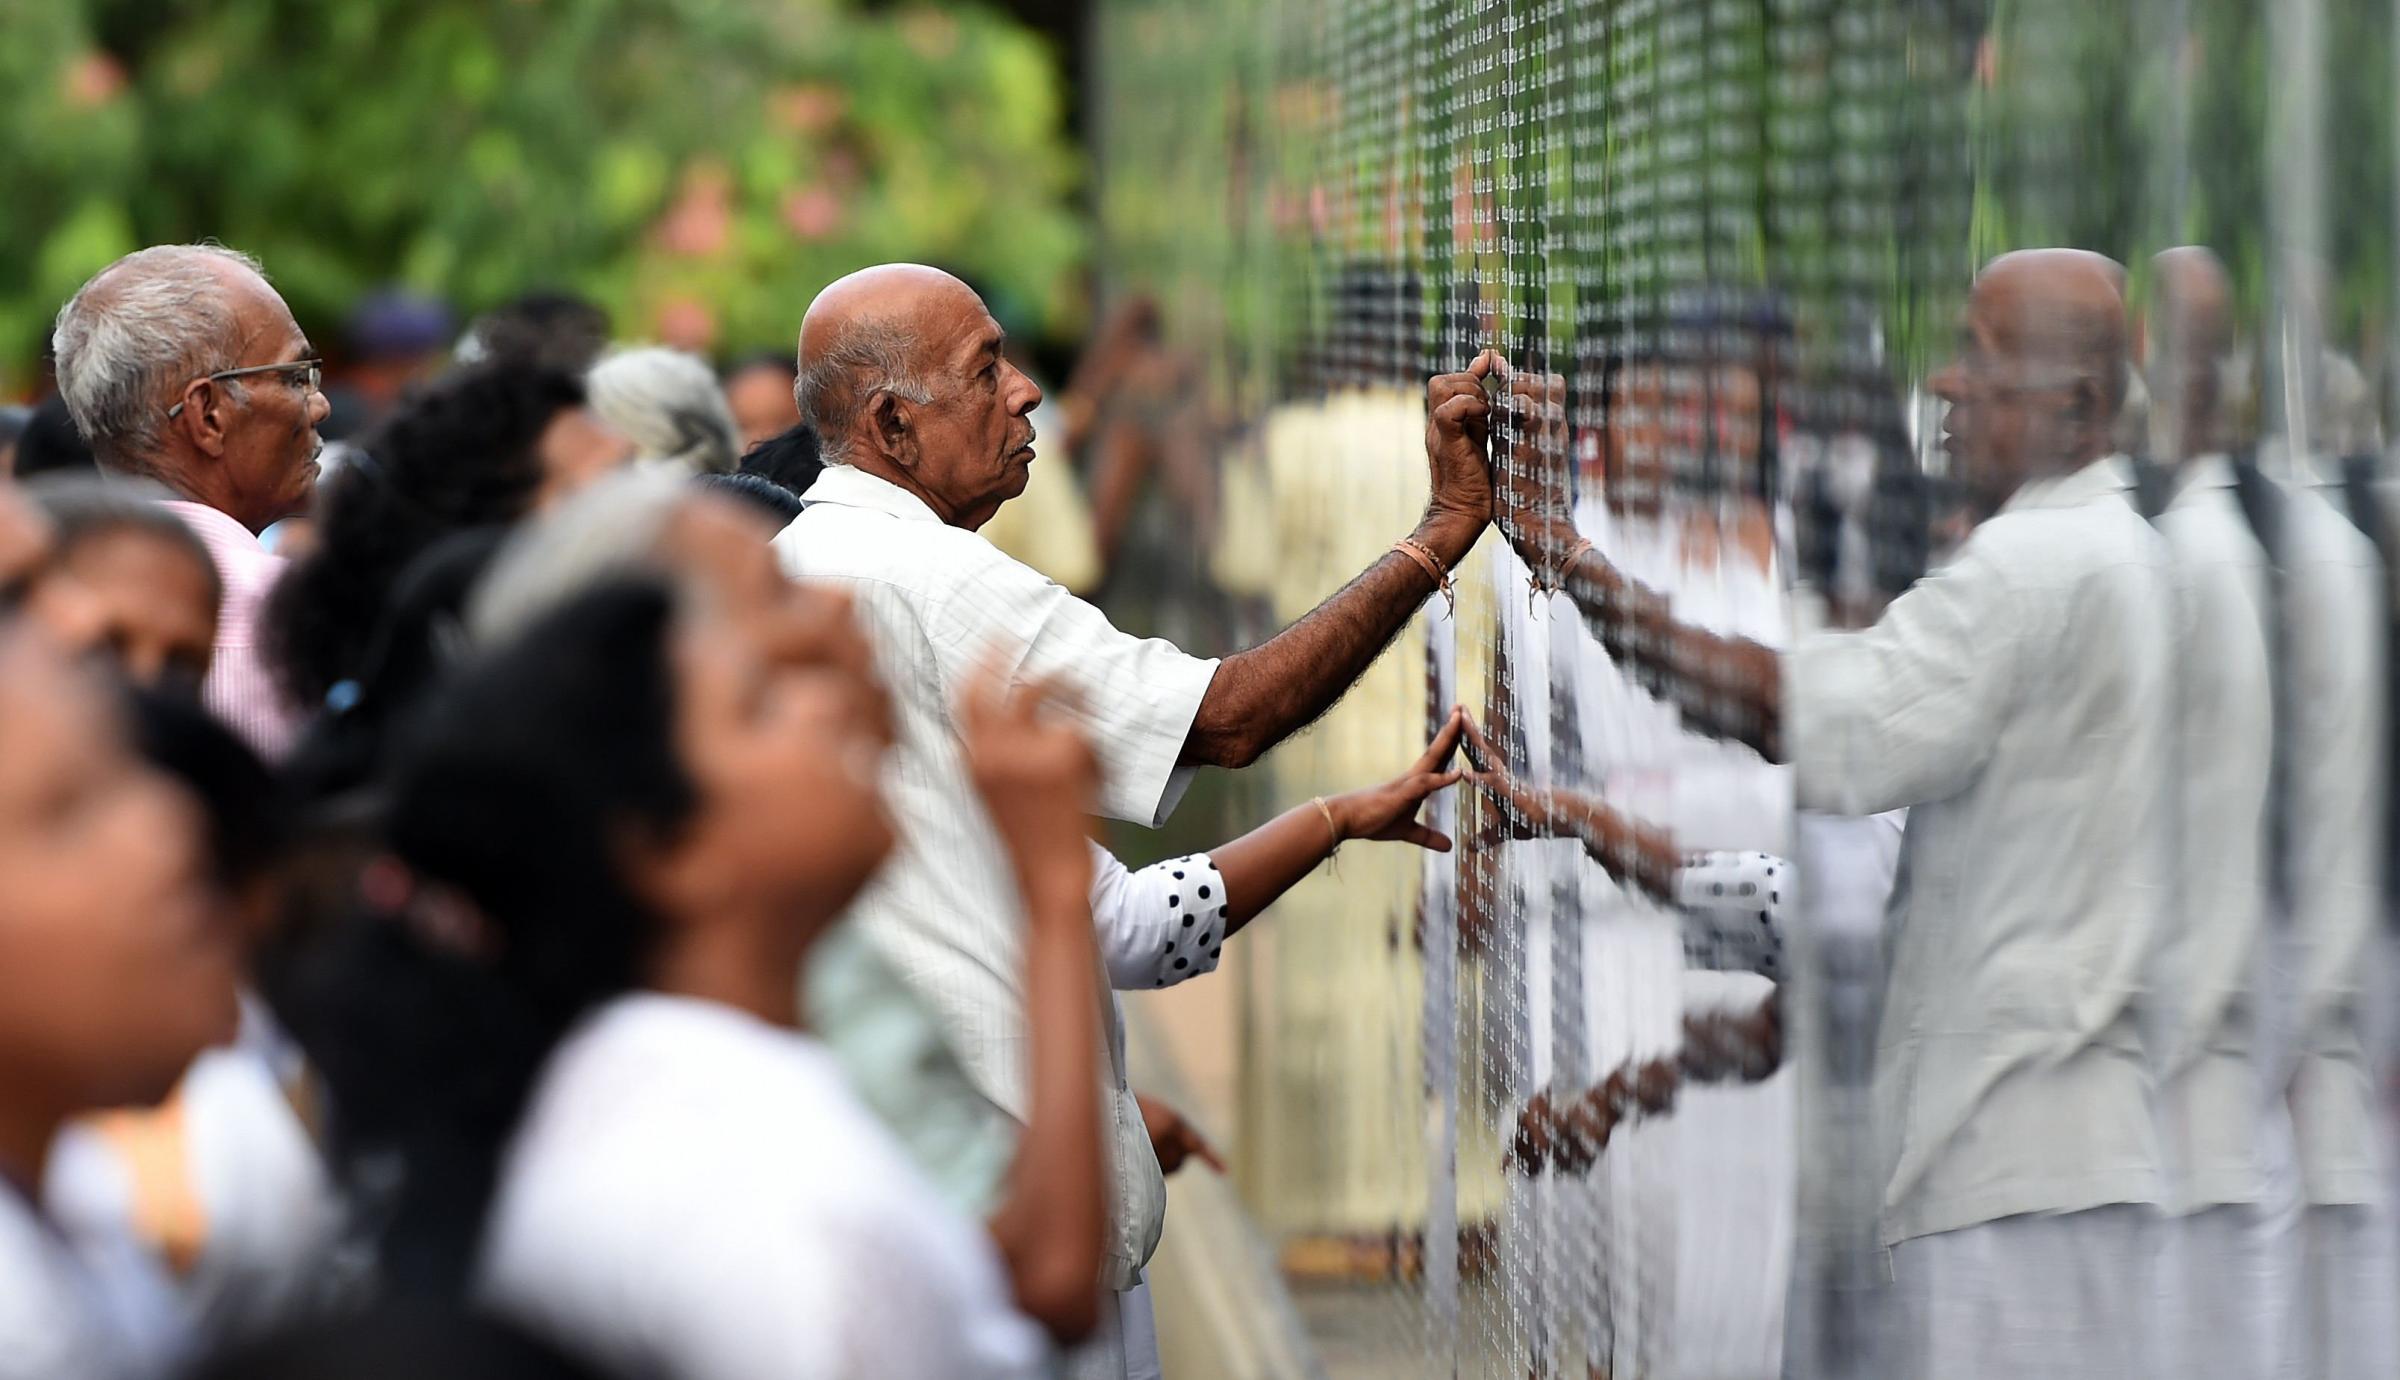 Sri Lankan attendees read through names of fallen soldiers on a memorial for those who died in the decades-long conflict against the Tamil Tigers, during a commemorative ceremony marking the 9th anniversary of the end of the islands civil war, in the